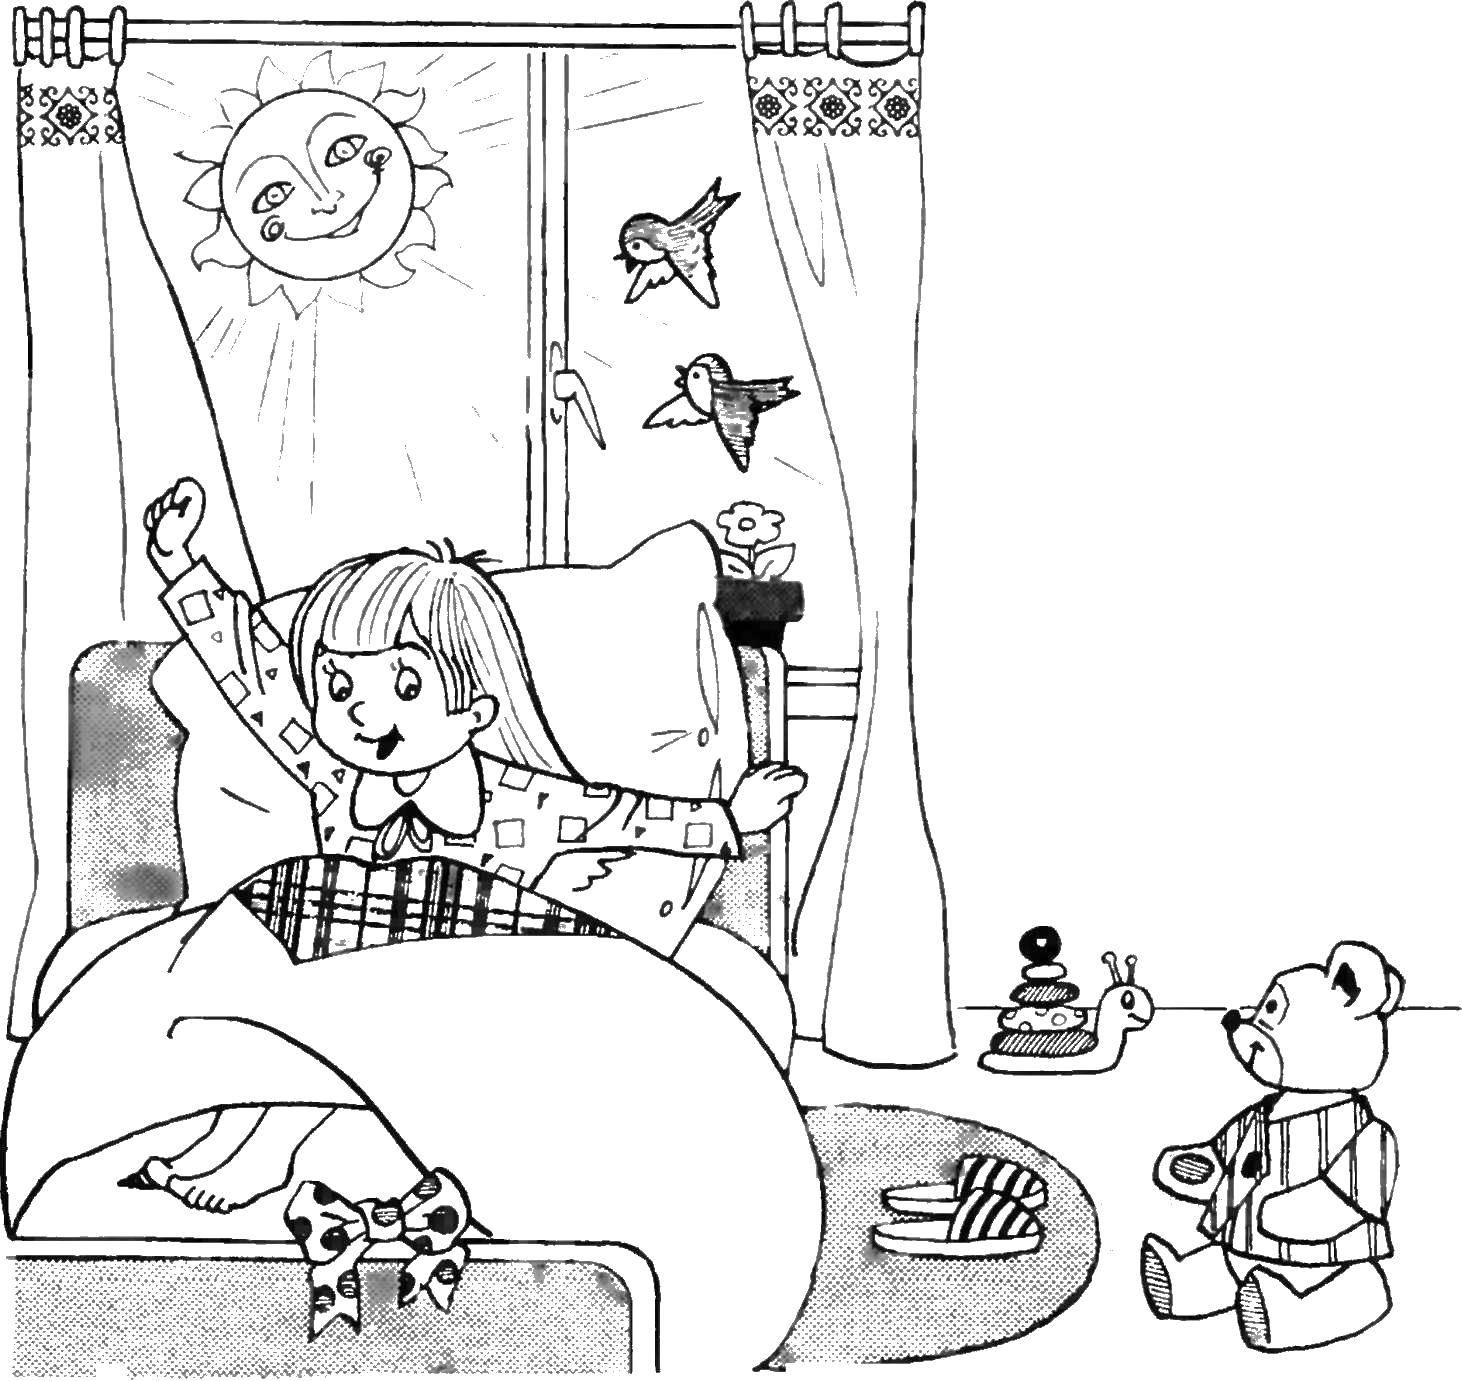 Coloring Girl in her room. Category children. Tags:  children, girl, toys, room.